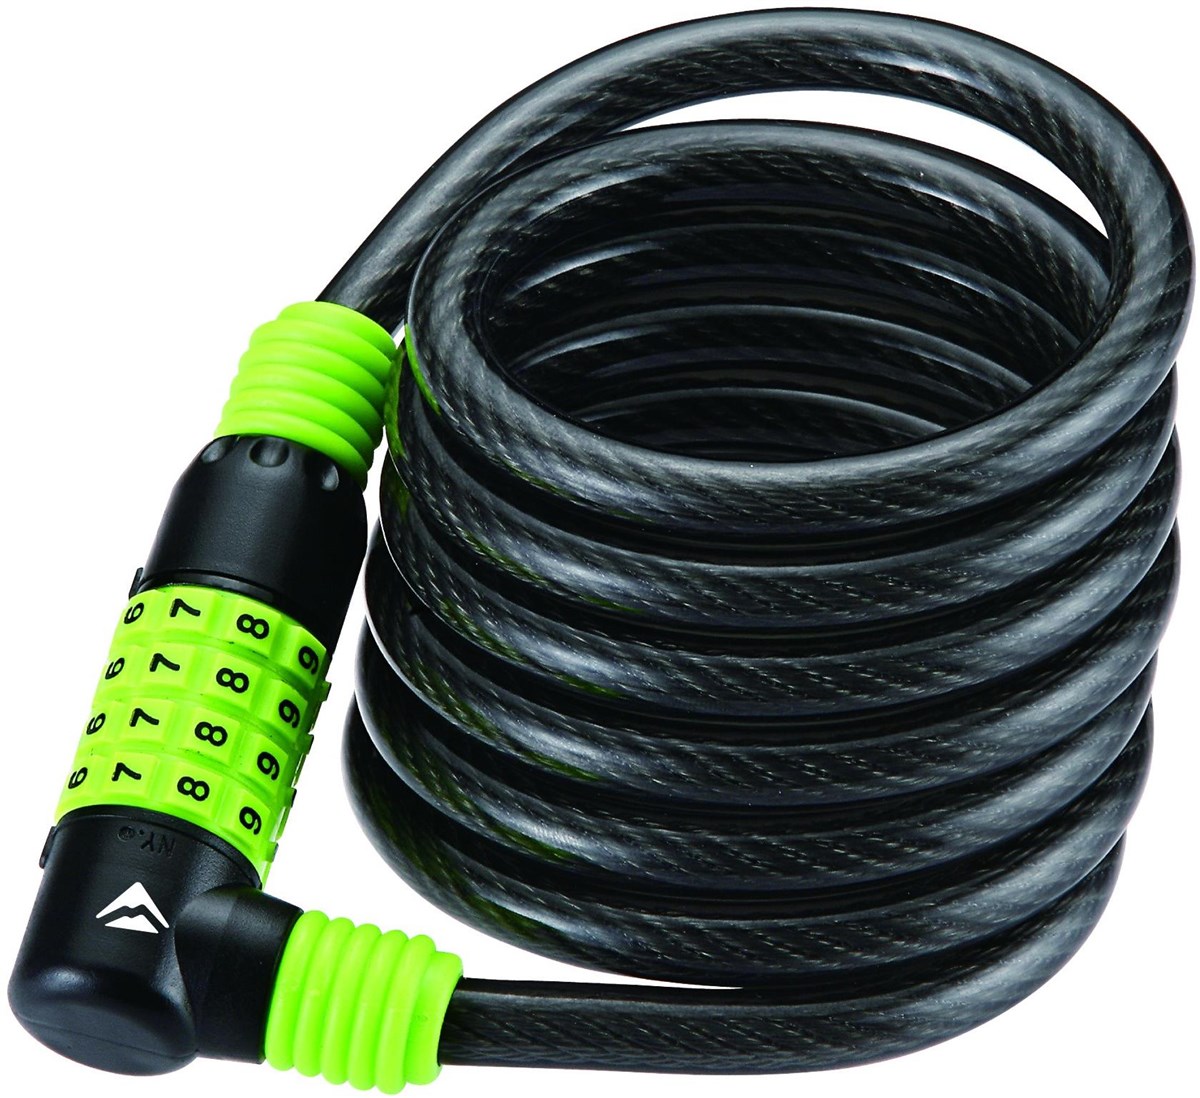 Merida Combination Cable Lock product image